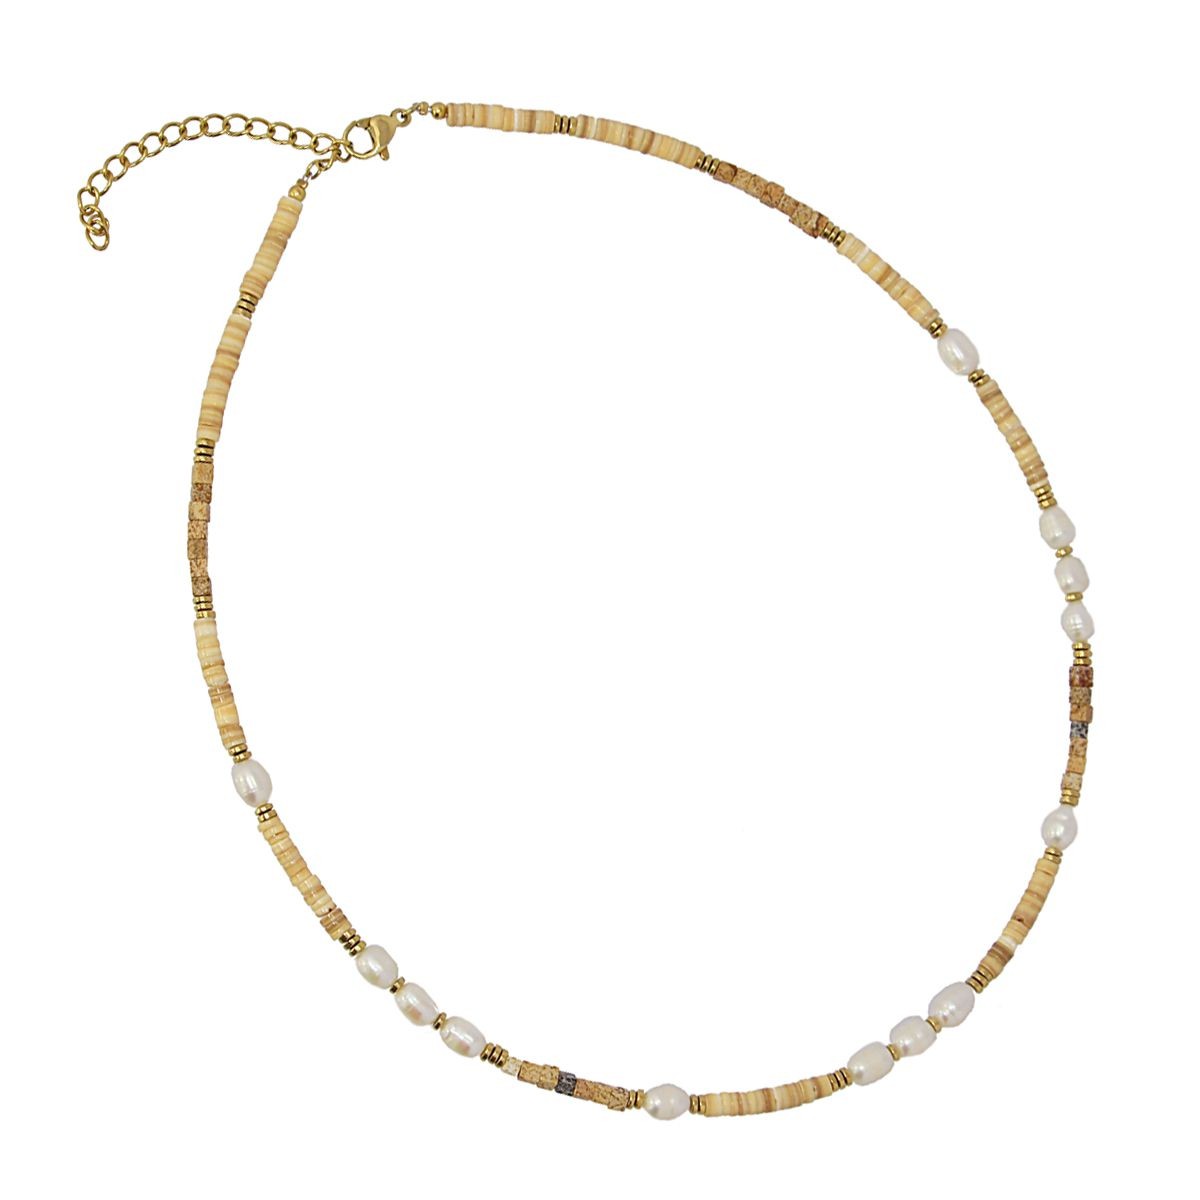 Guadiana Necklace